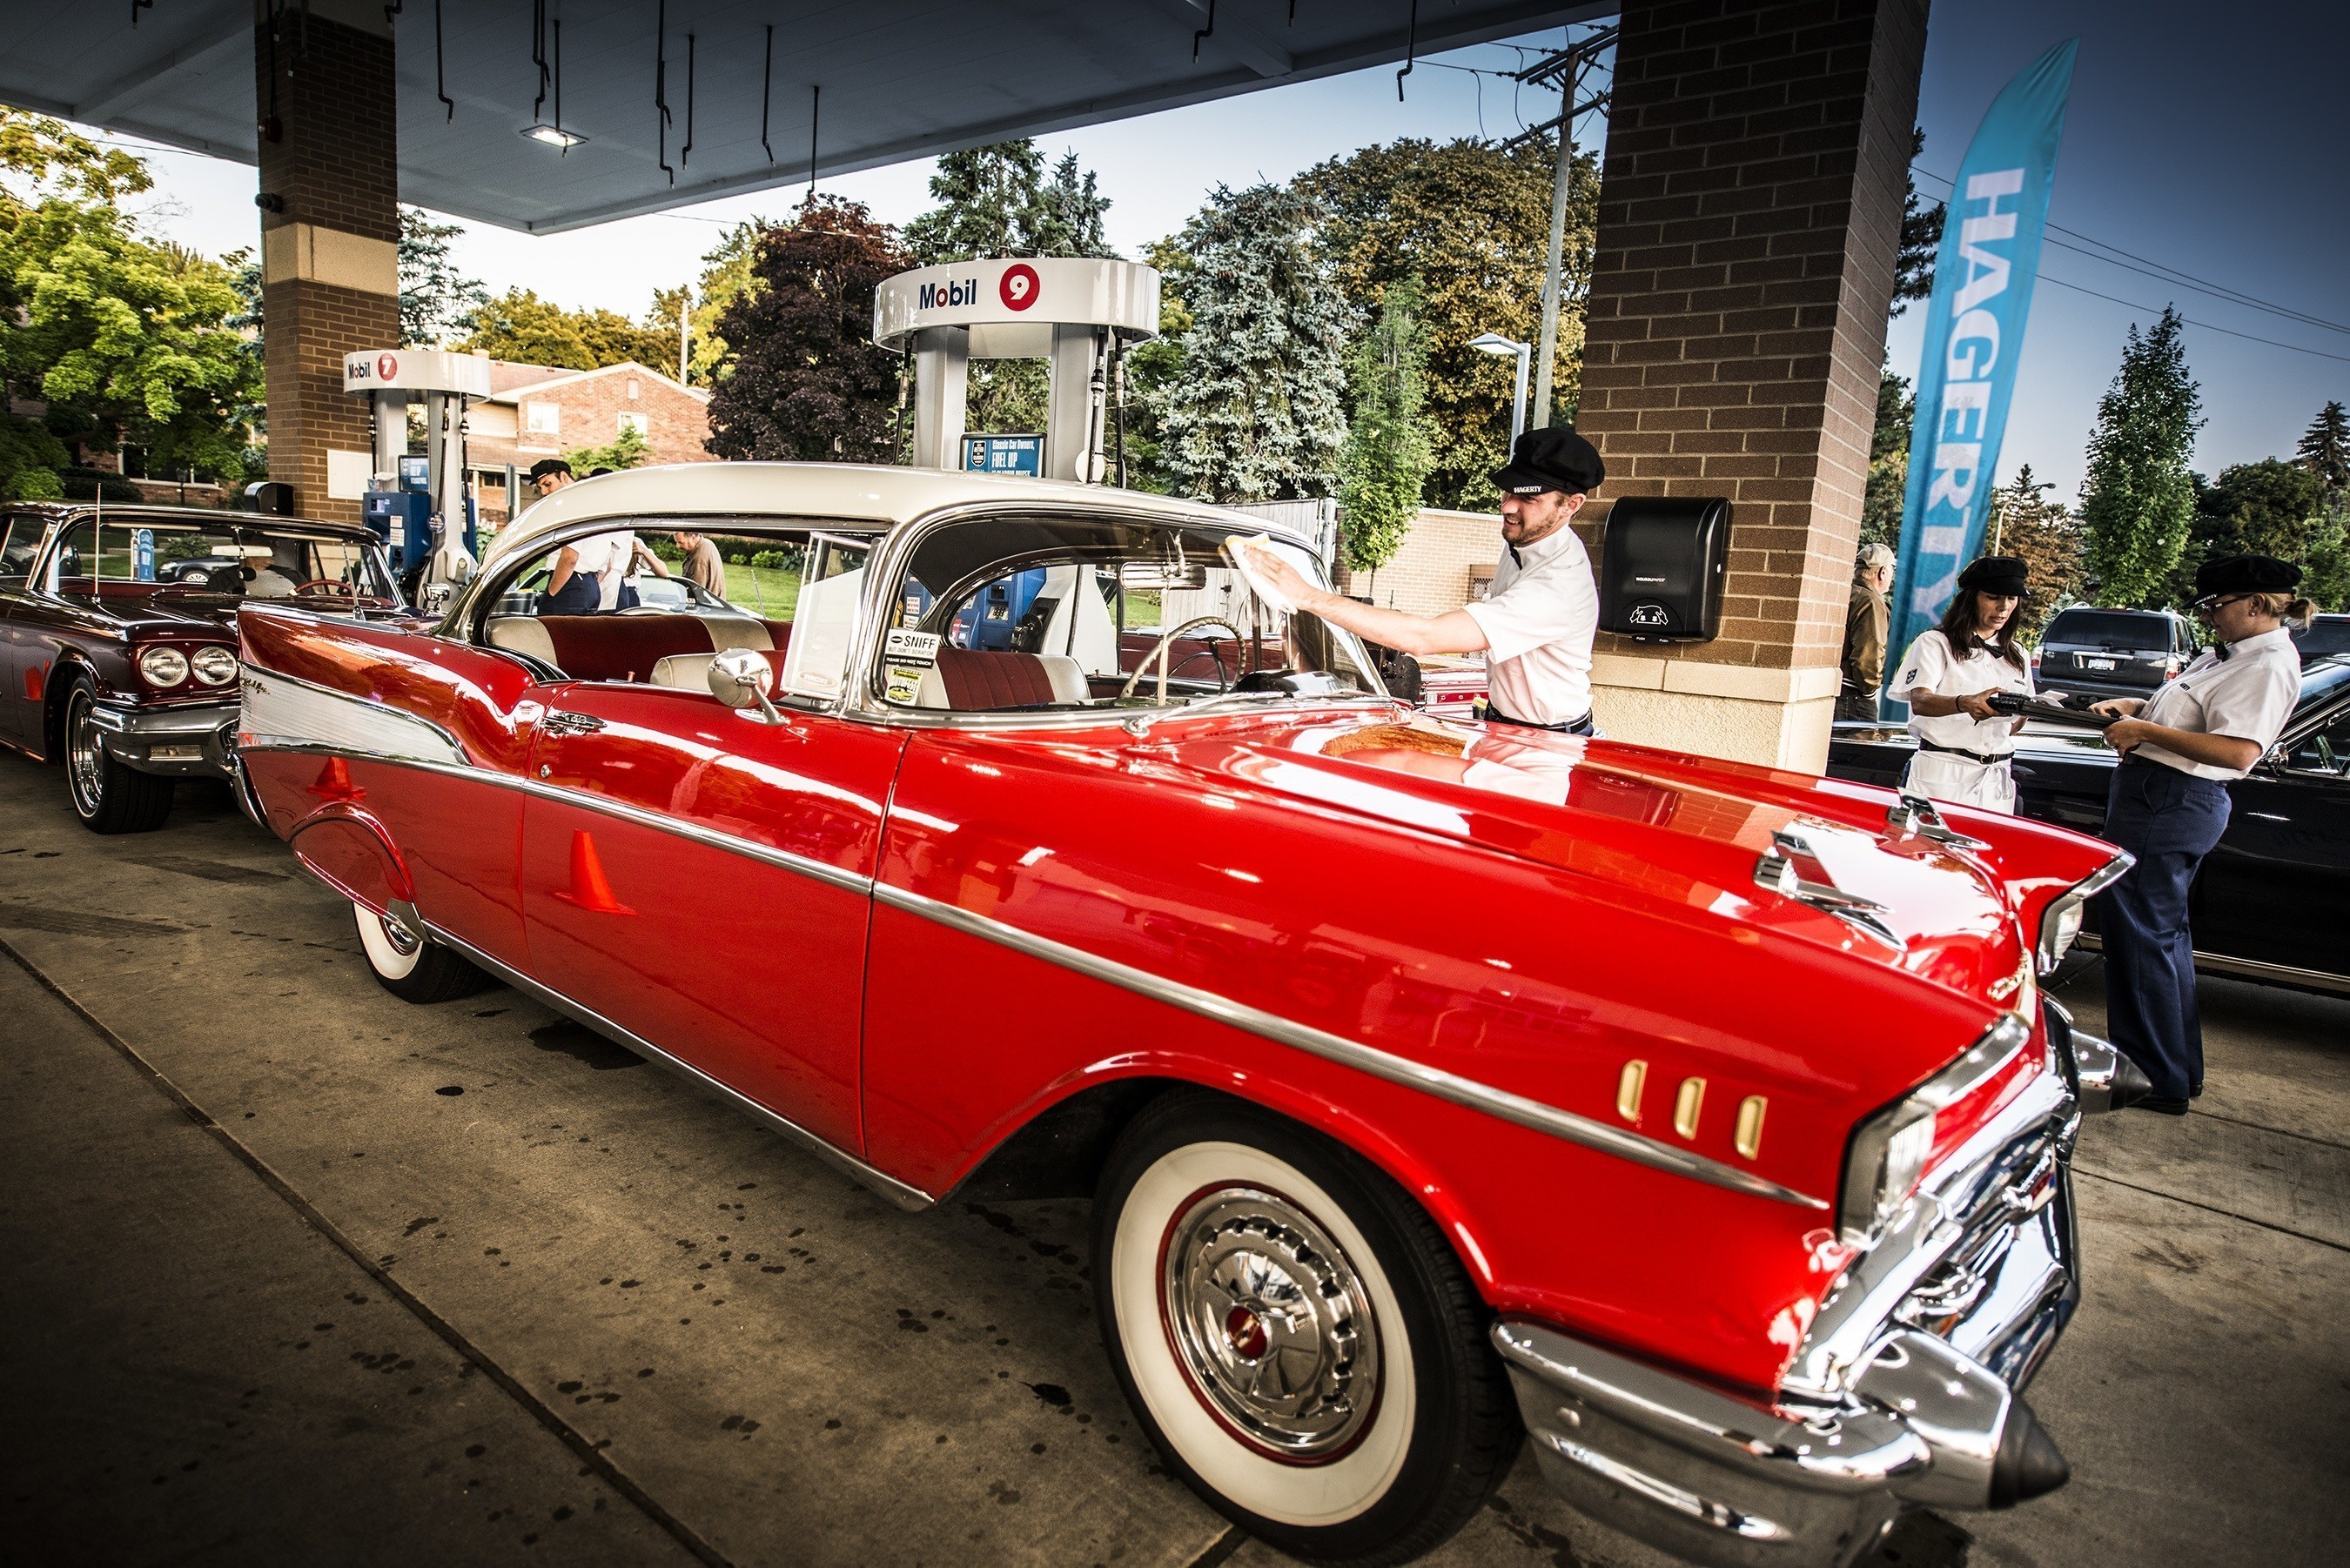 Hagerty Classic Car Magazine provides the full service experience to a 1957 Chevrolet Bel Air to celebrate National Collector Car Appreciation Day. (PRNewsFoto/Hagerty Classic Car Magazine)